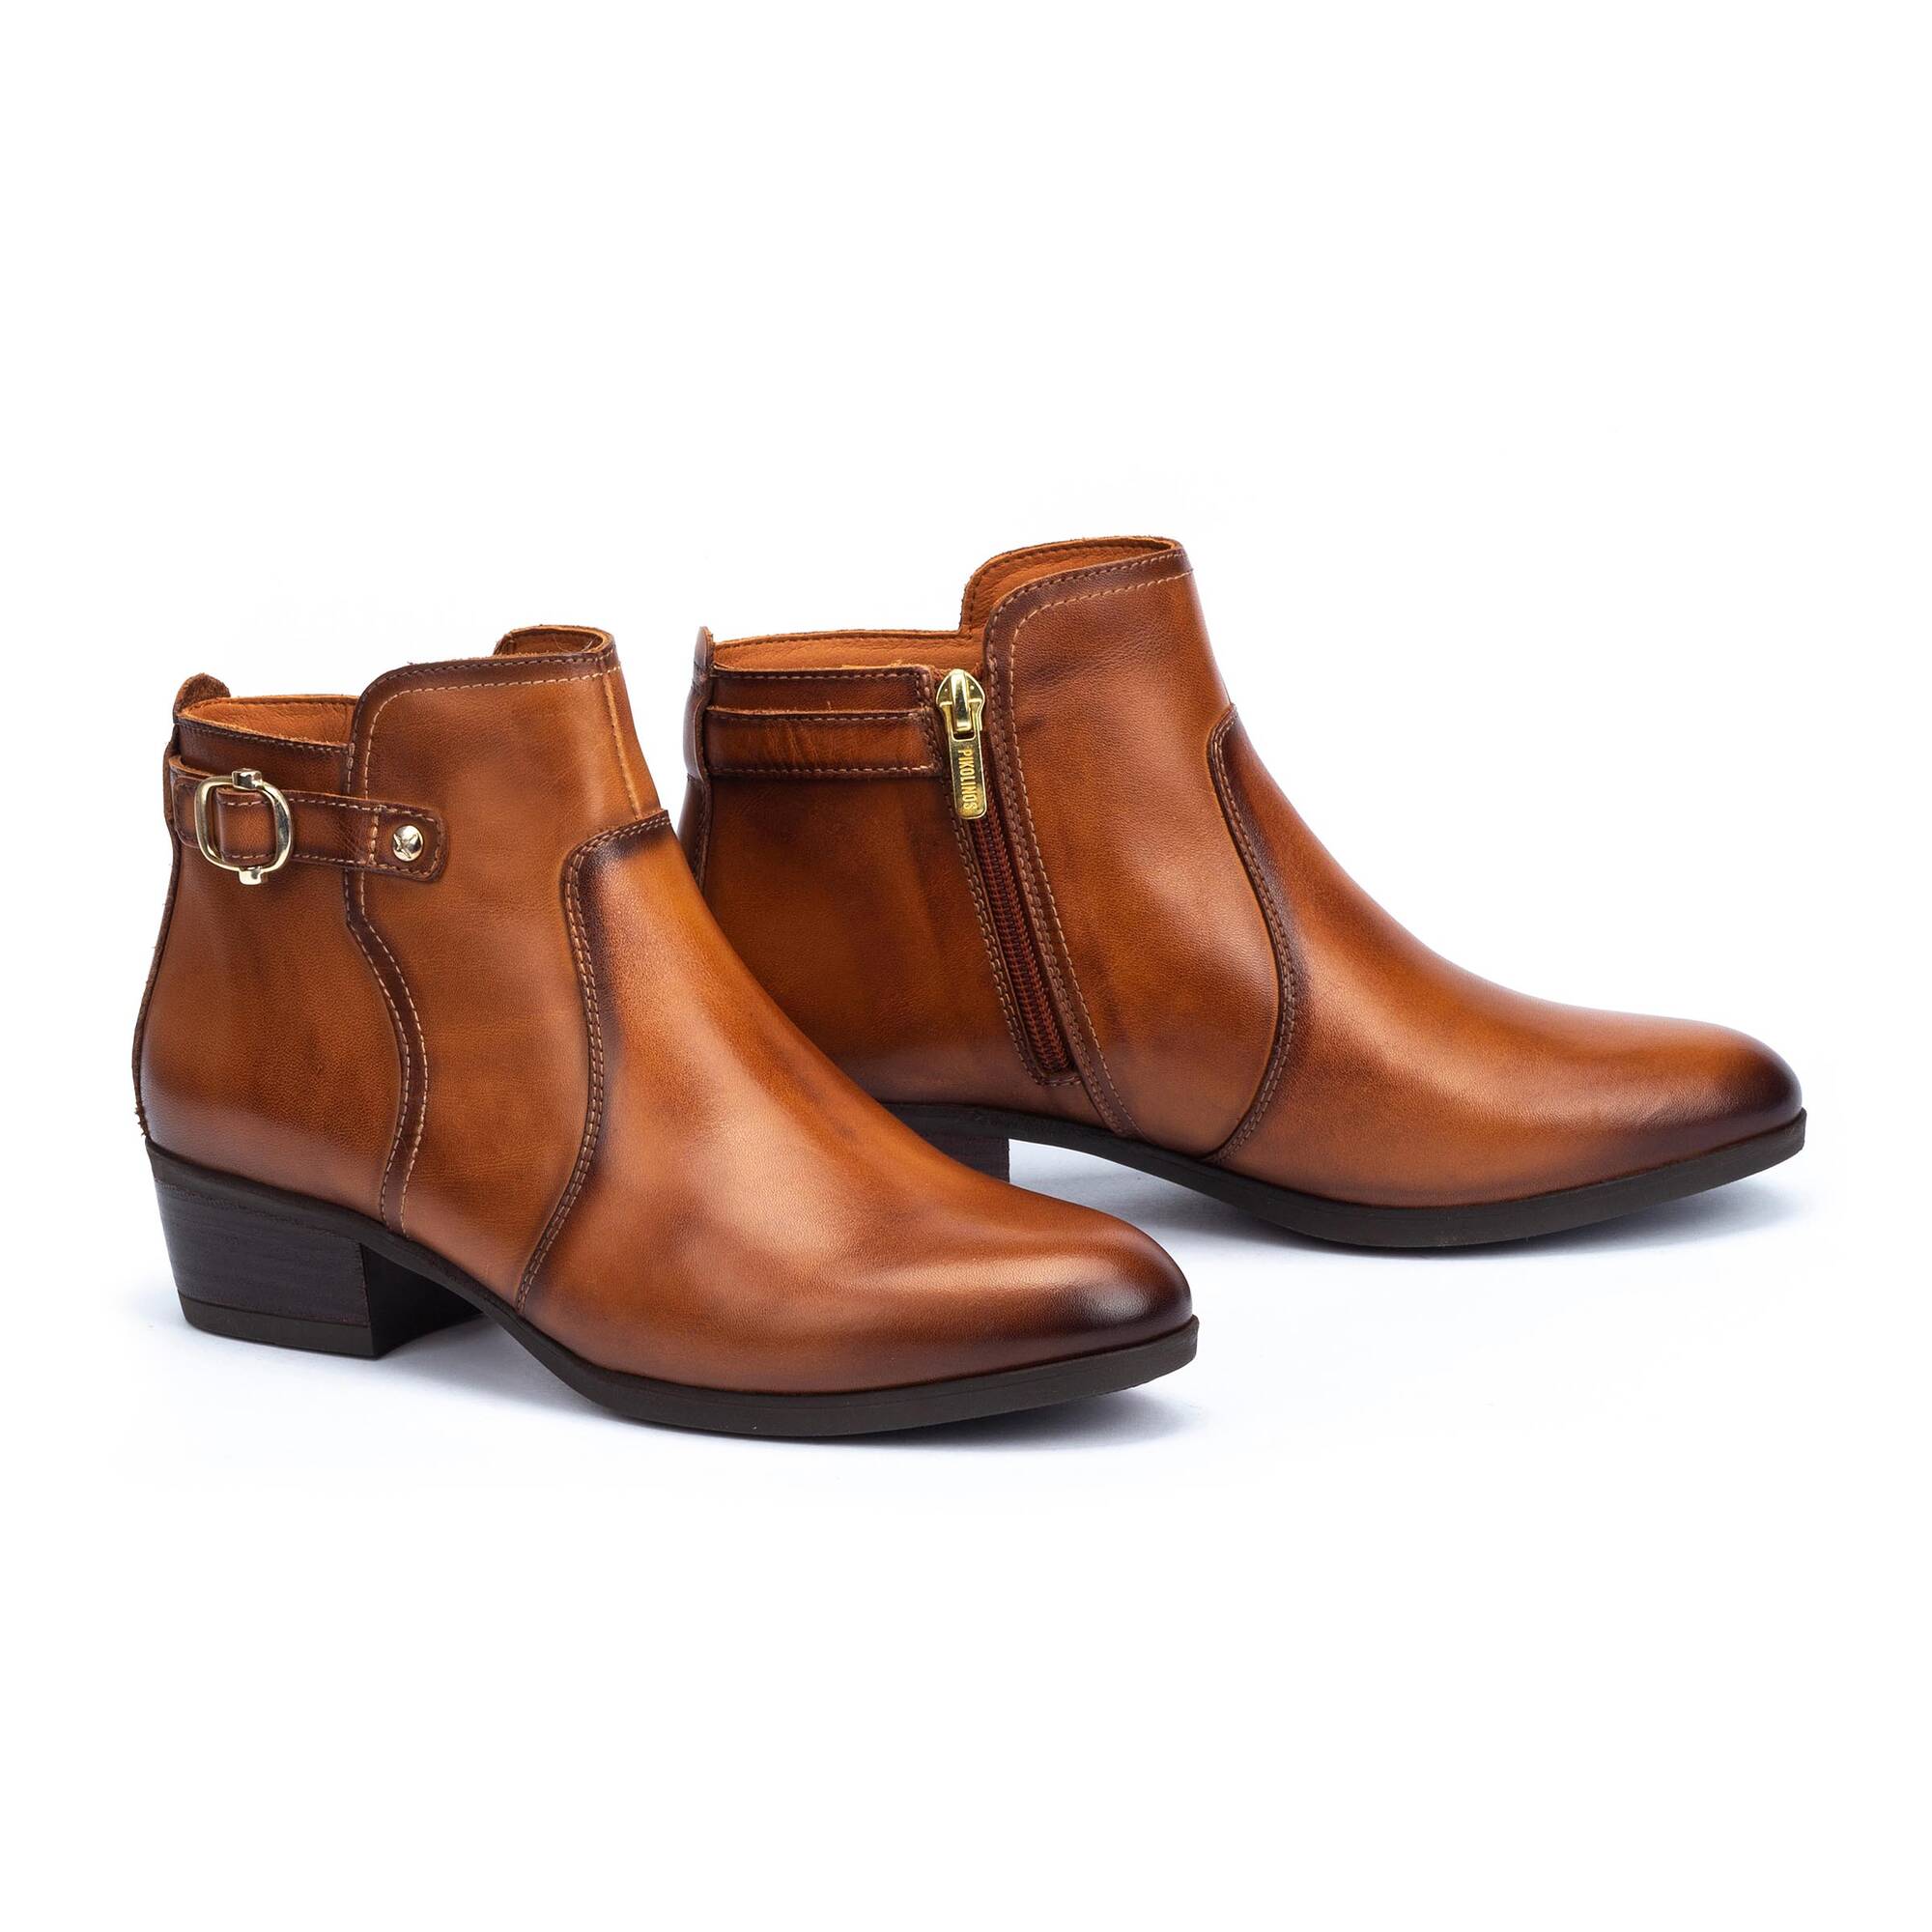 Ankle boots | DAROCA W1U-8759, , large image number 100 | null